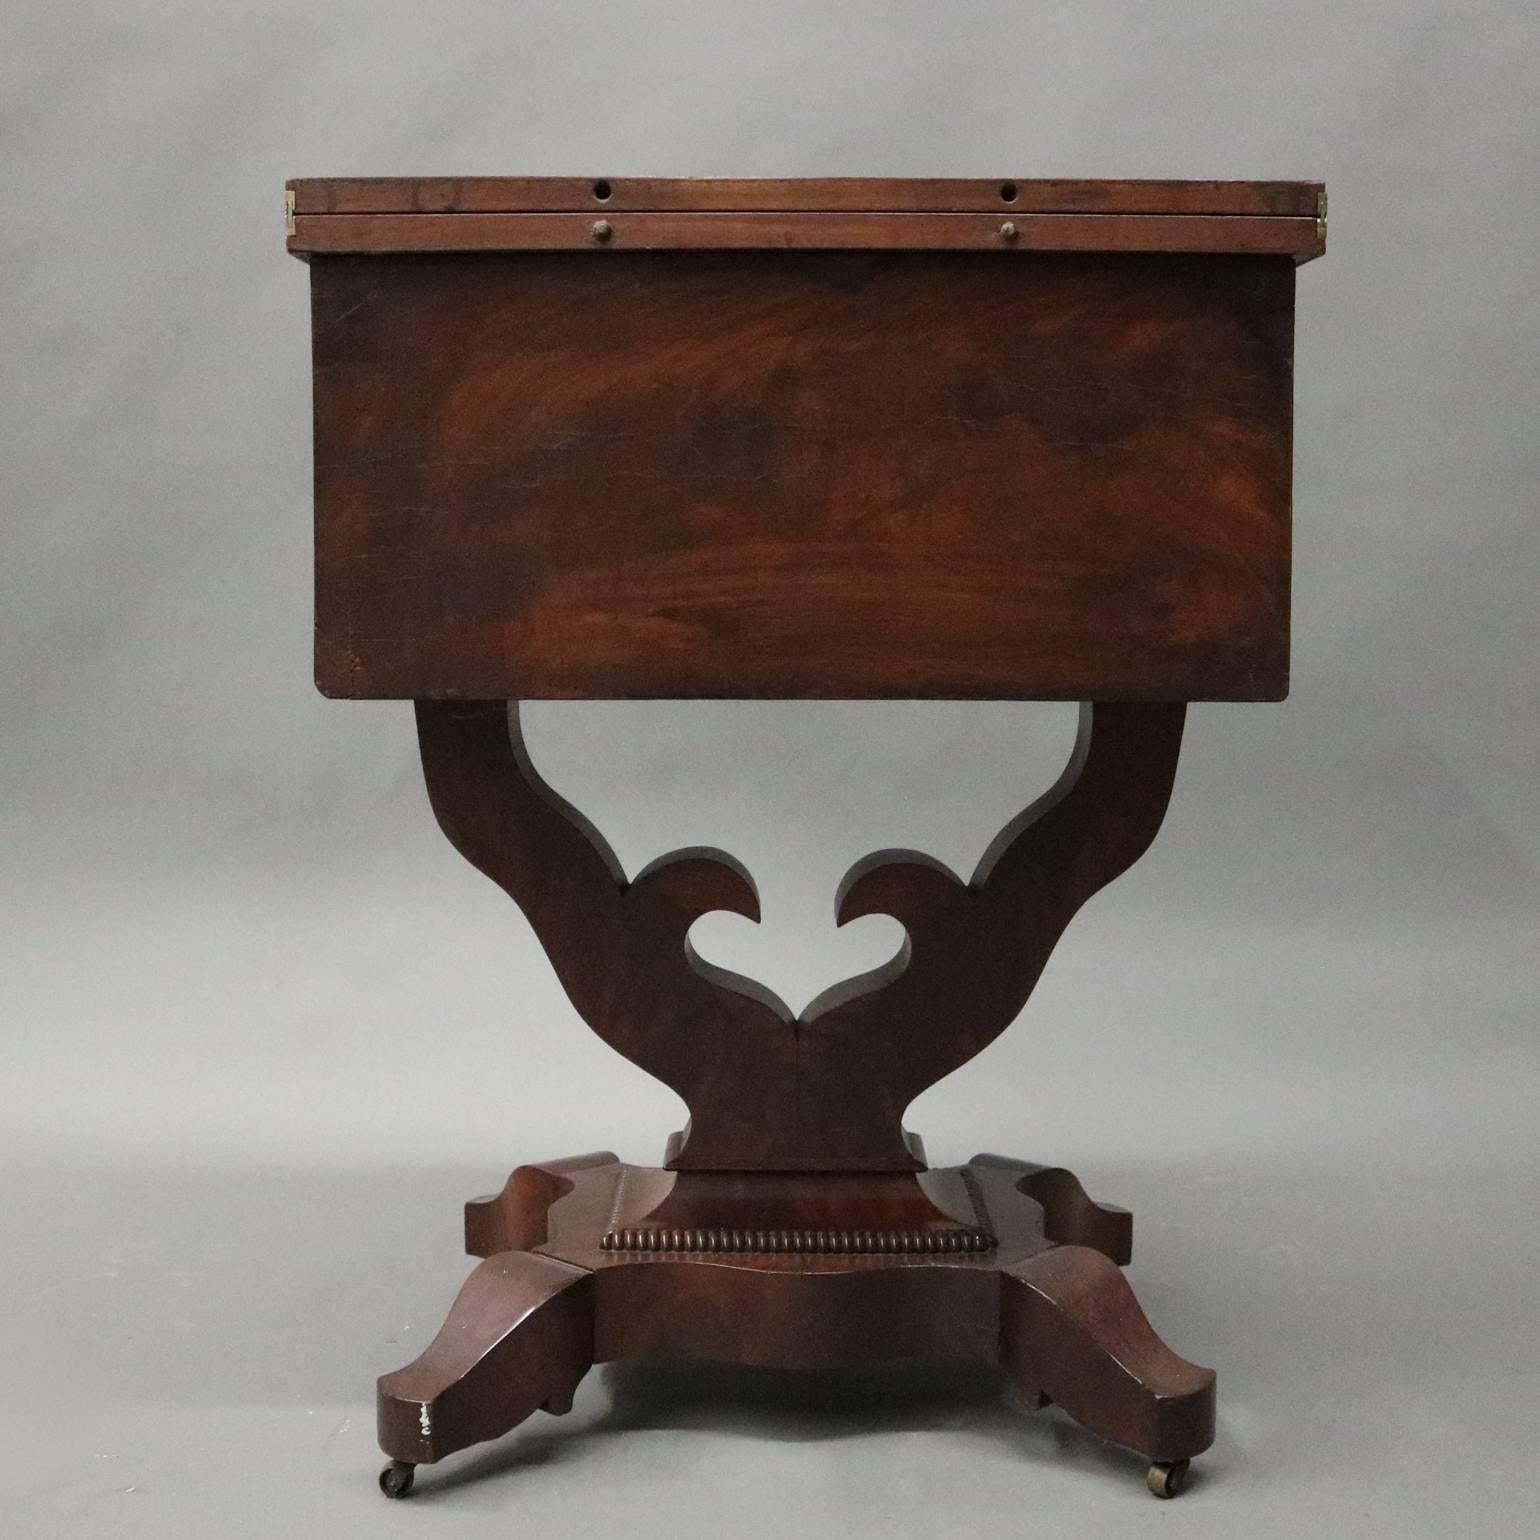 American Antique Flame Mahogany Front Two-Drawer Flip-Top Sewing Stand, circa 1880